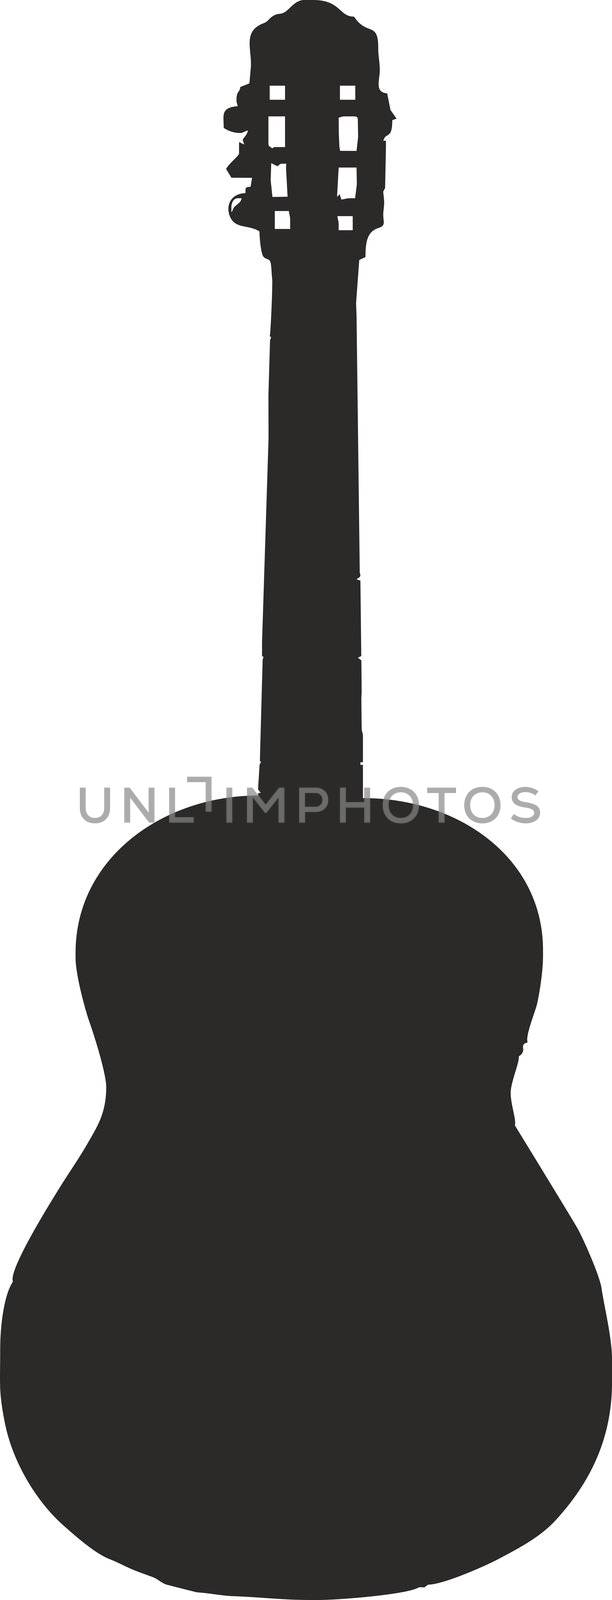 classic guitar silhouette by paolo77